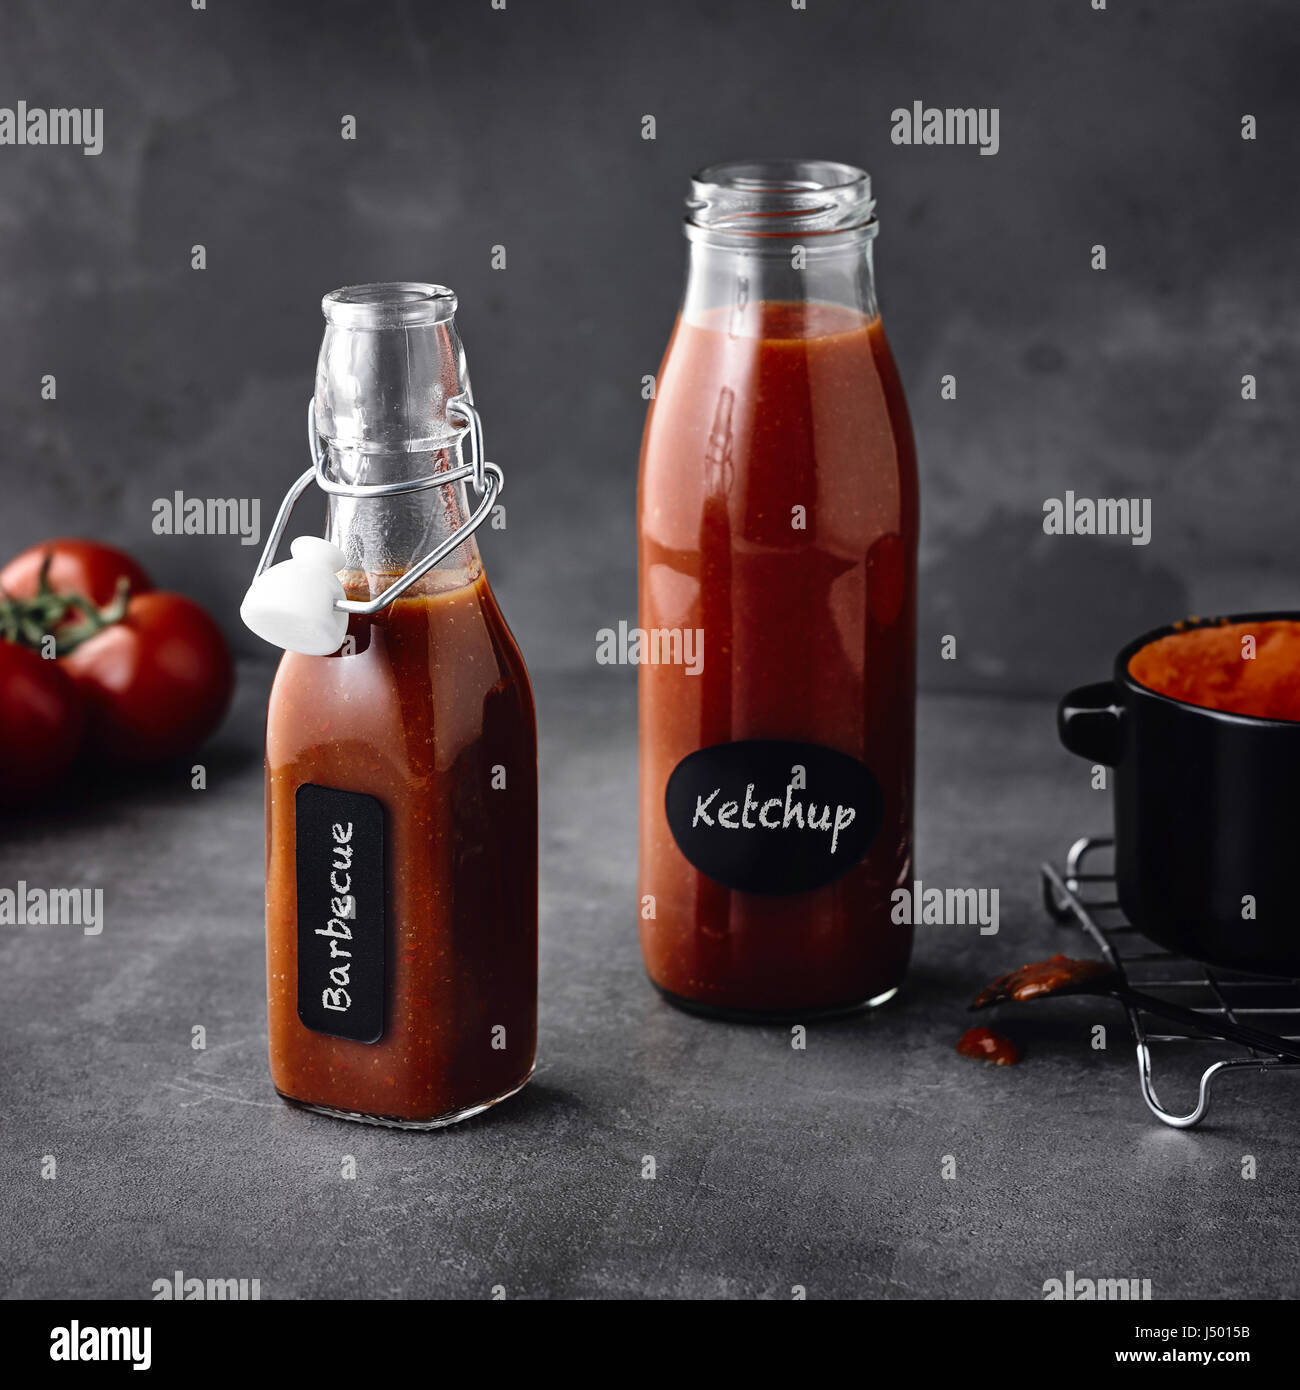 Tomato ketchup and barbecue sauce Stock Photo